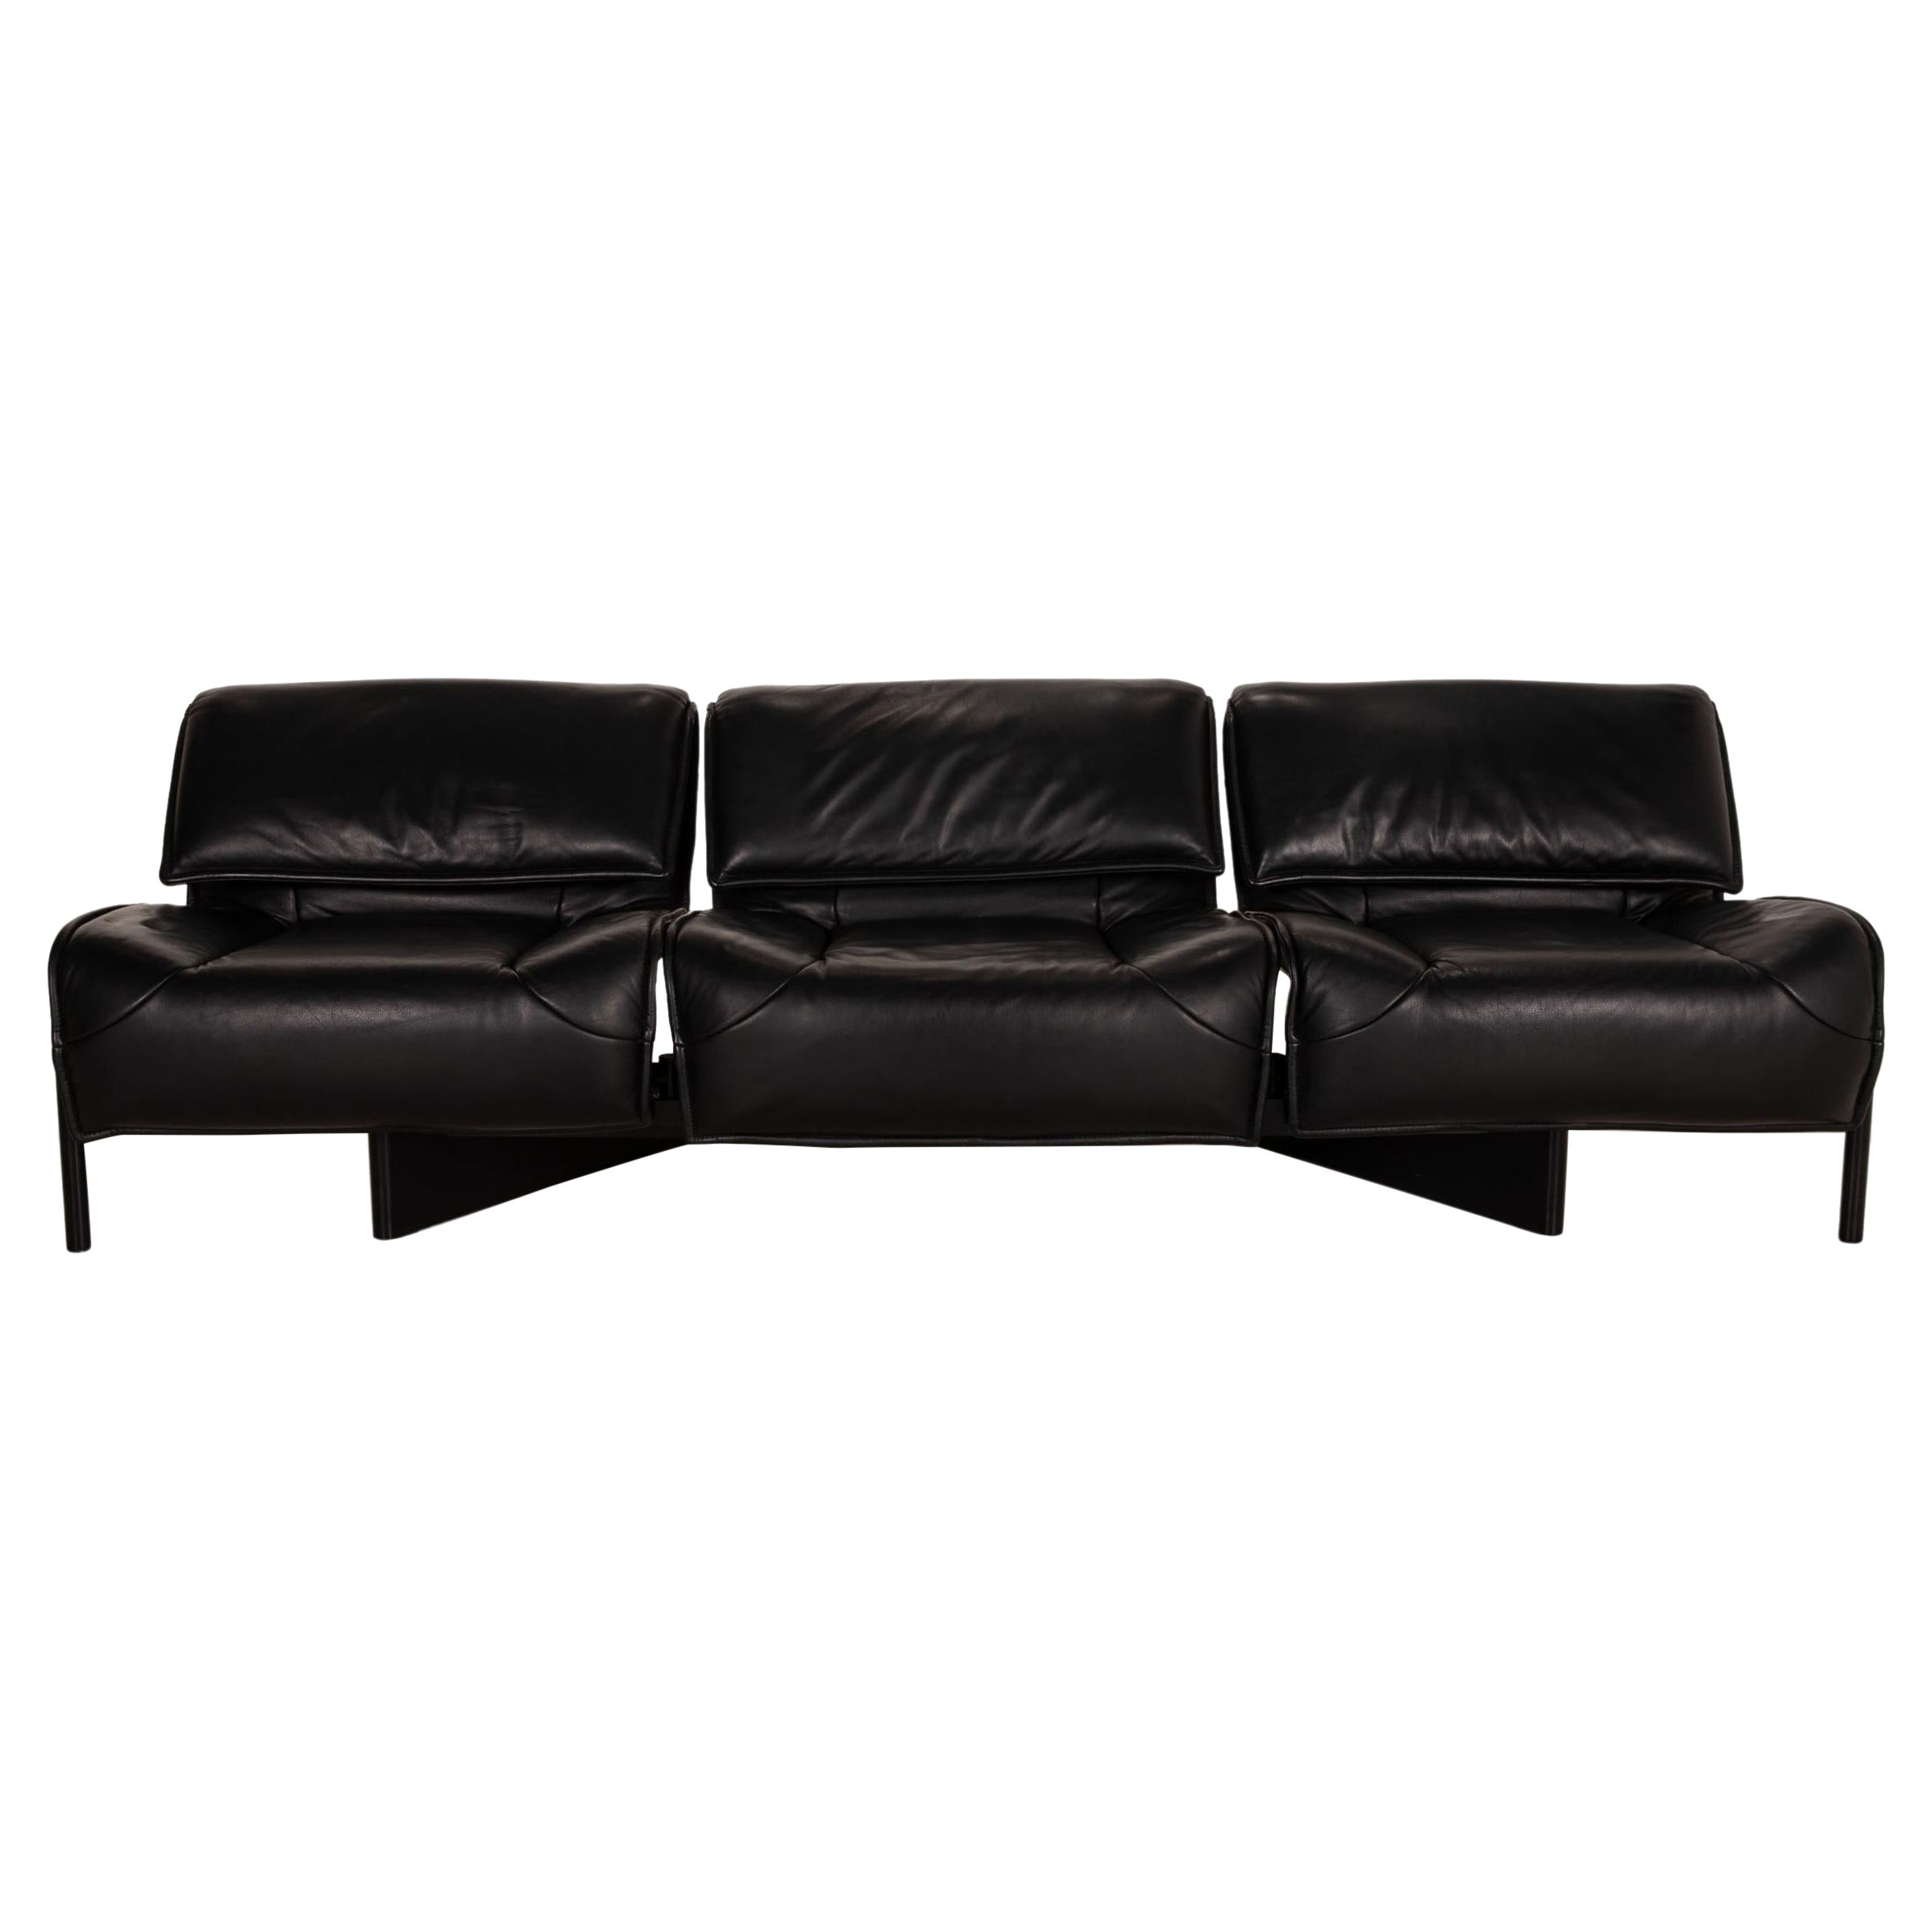 Cassina Veranda Leather Sofa Black Three-Seater Couch Function For Sale